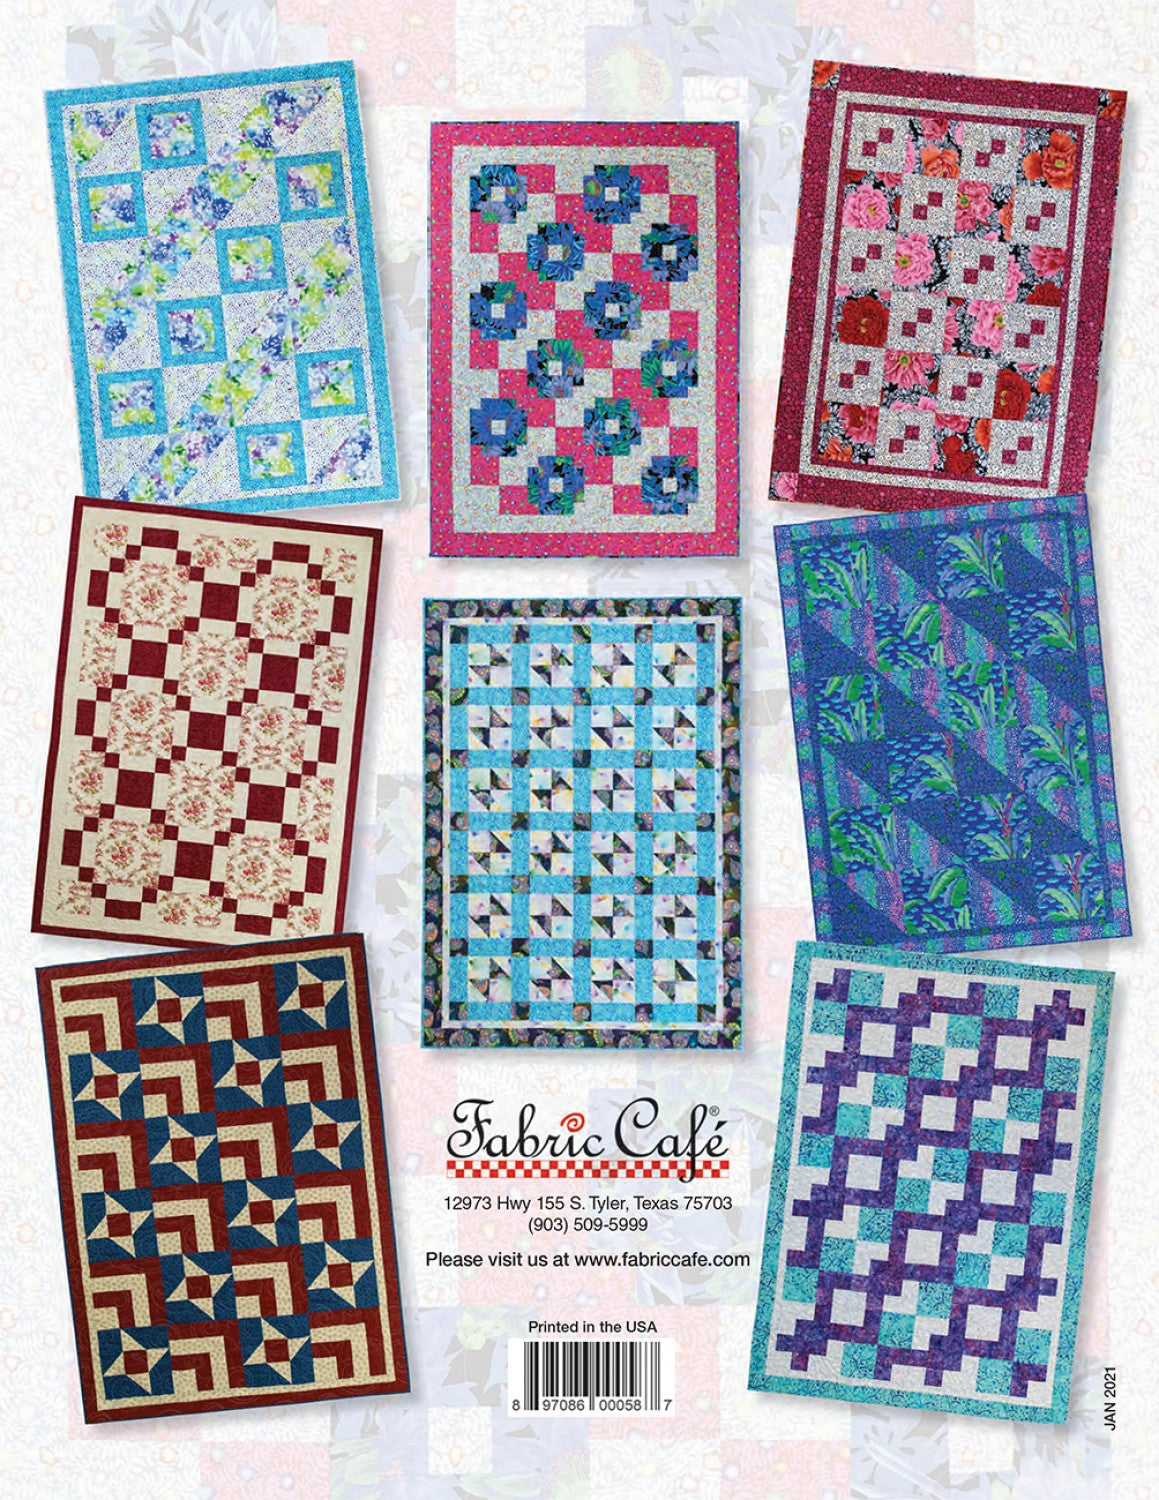 Bee's Quilting & Gifts - New 3 Yard Quilt Pattern Books Fabric